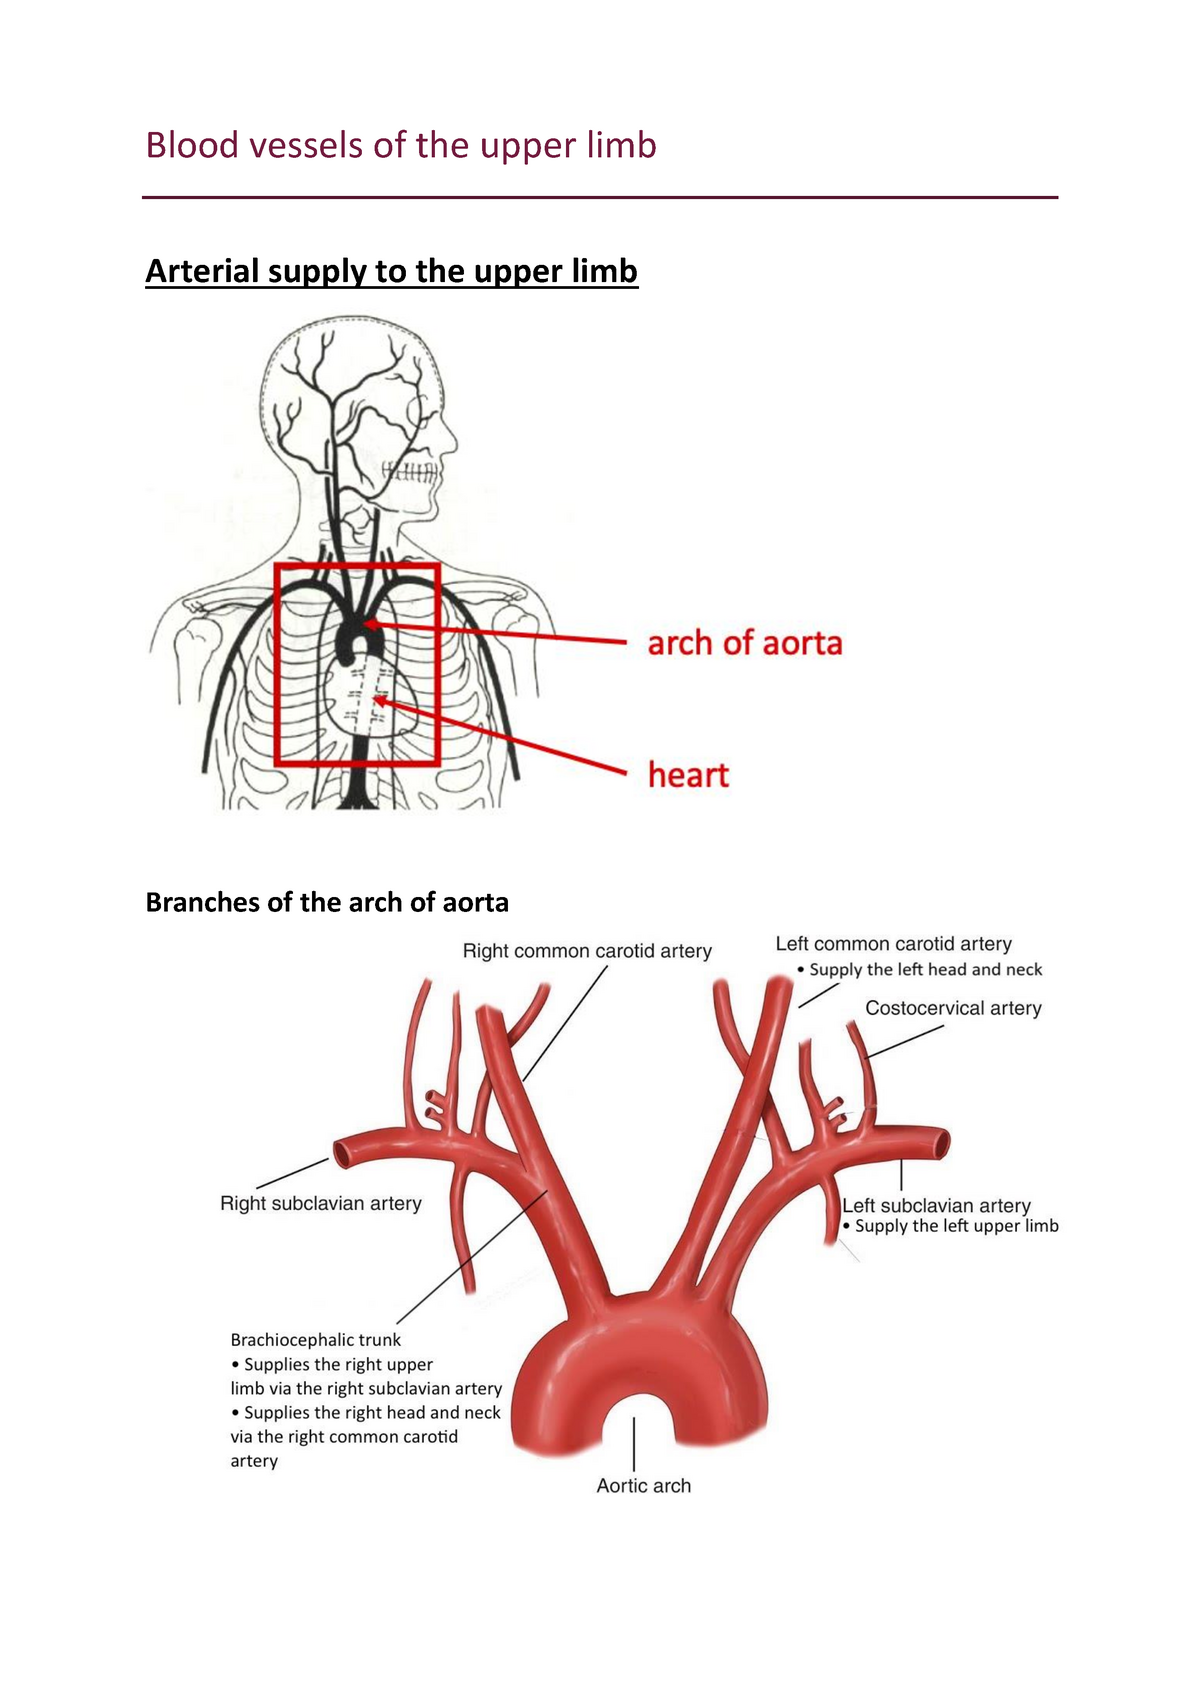 Upper limb blood vessels - WikiLectures